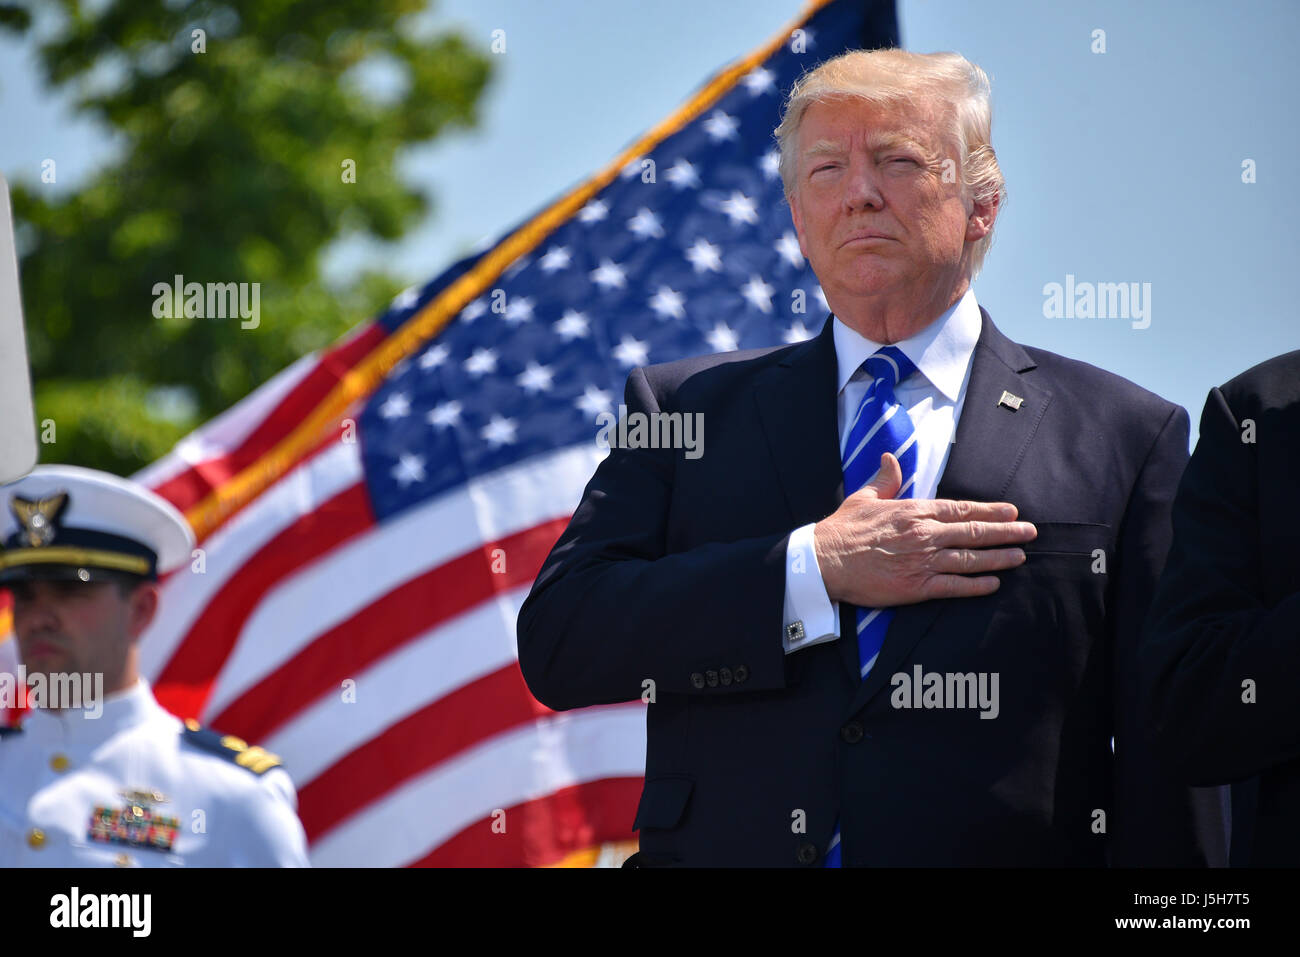 New London, USA. 17th May, 2017. U.S. President Donald Trump salutes during the national anthem at the 136th Coast Guard Academy commencement ceremony May 17, 2017 in New London, Connecticut. Credit: Planetpix/Alamy Live News Stock Photo